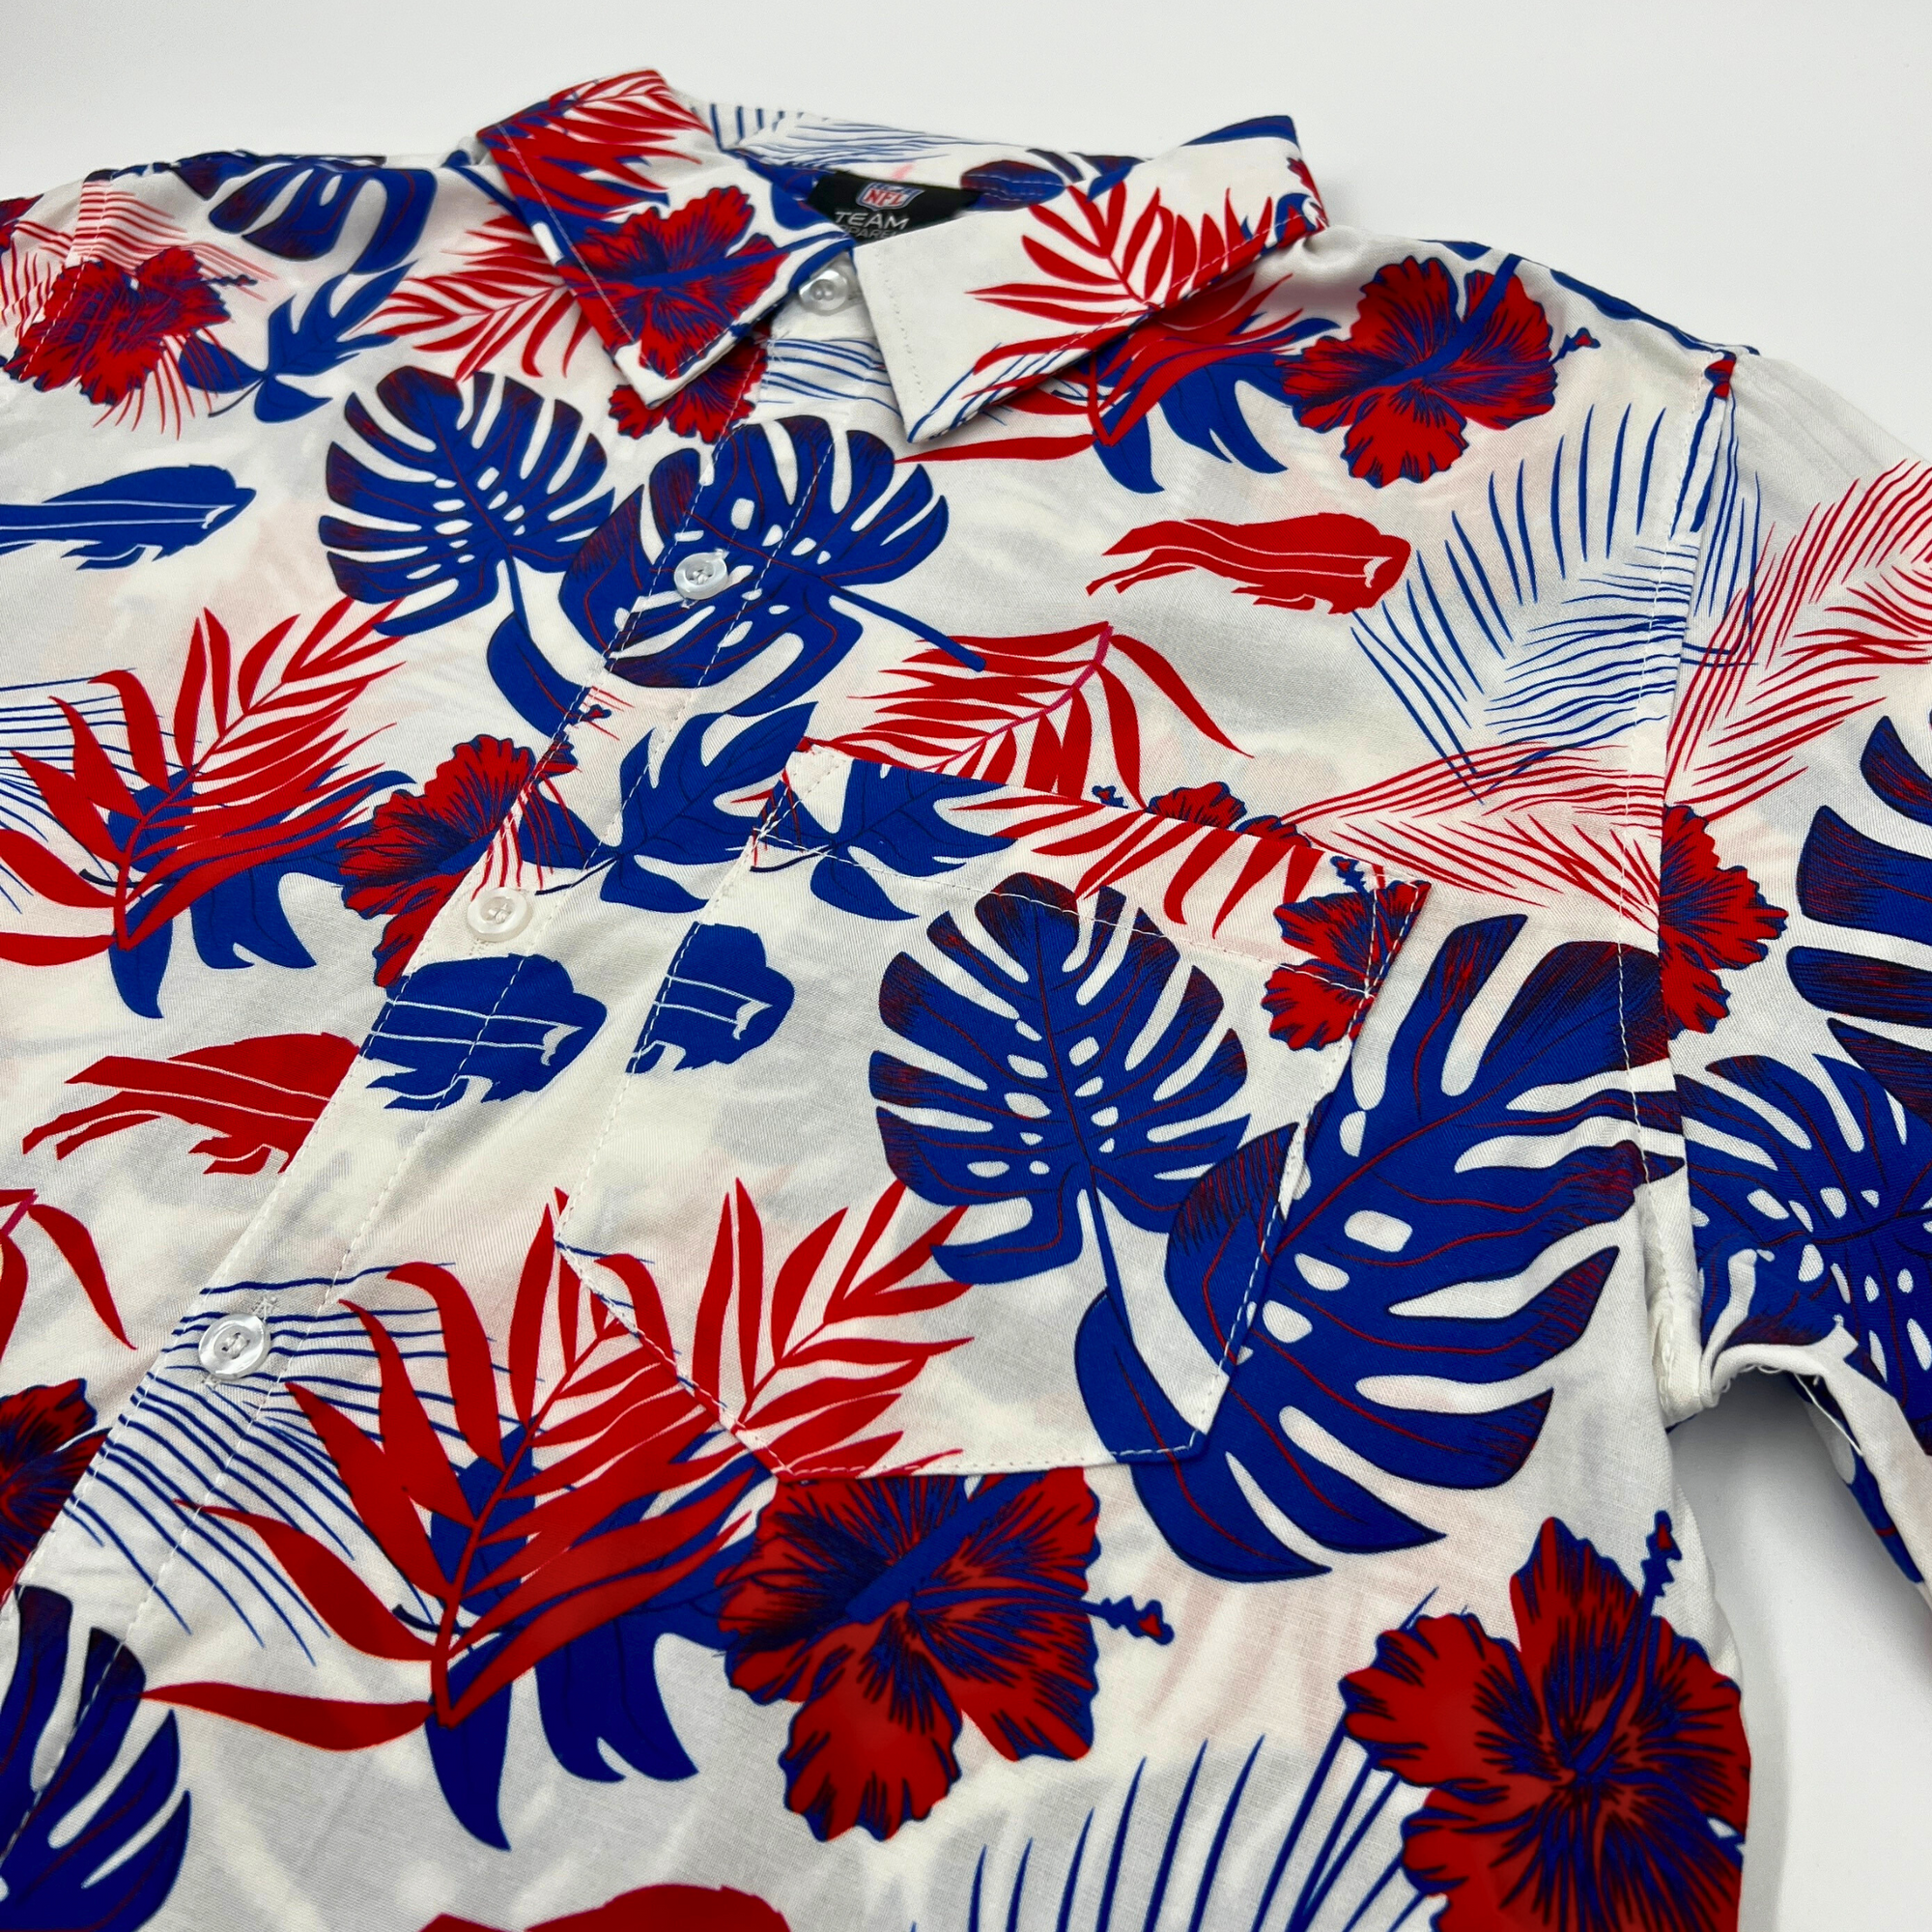 Buffalo Bills Spring Floral White Button Up